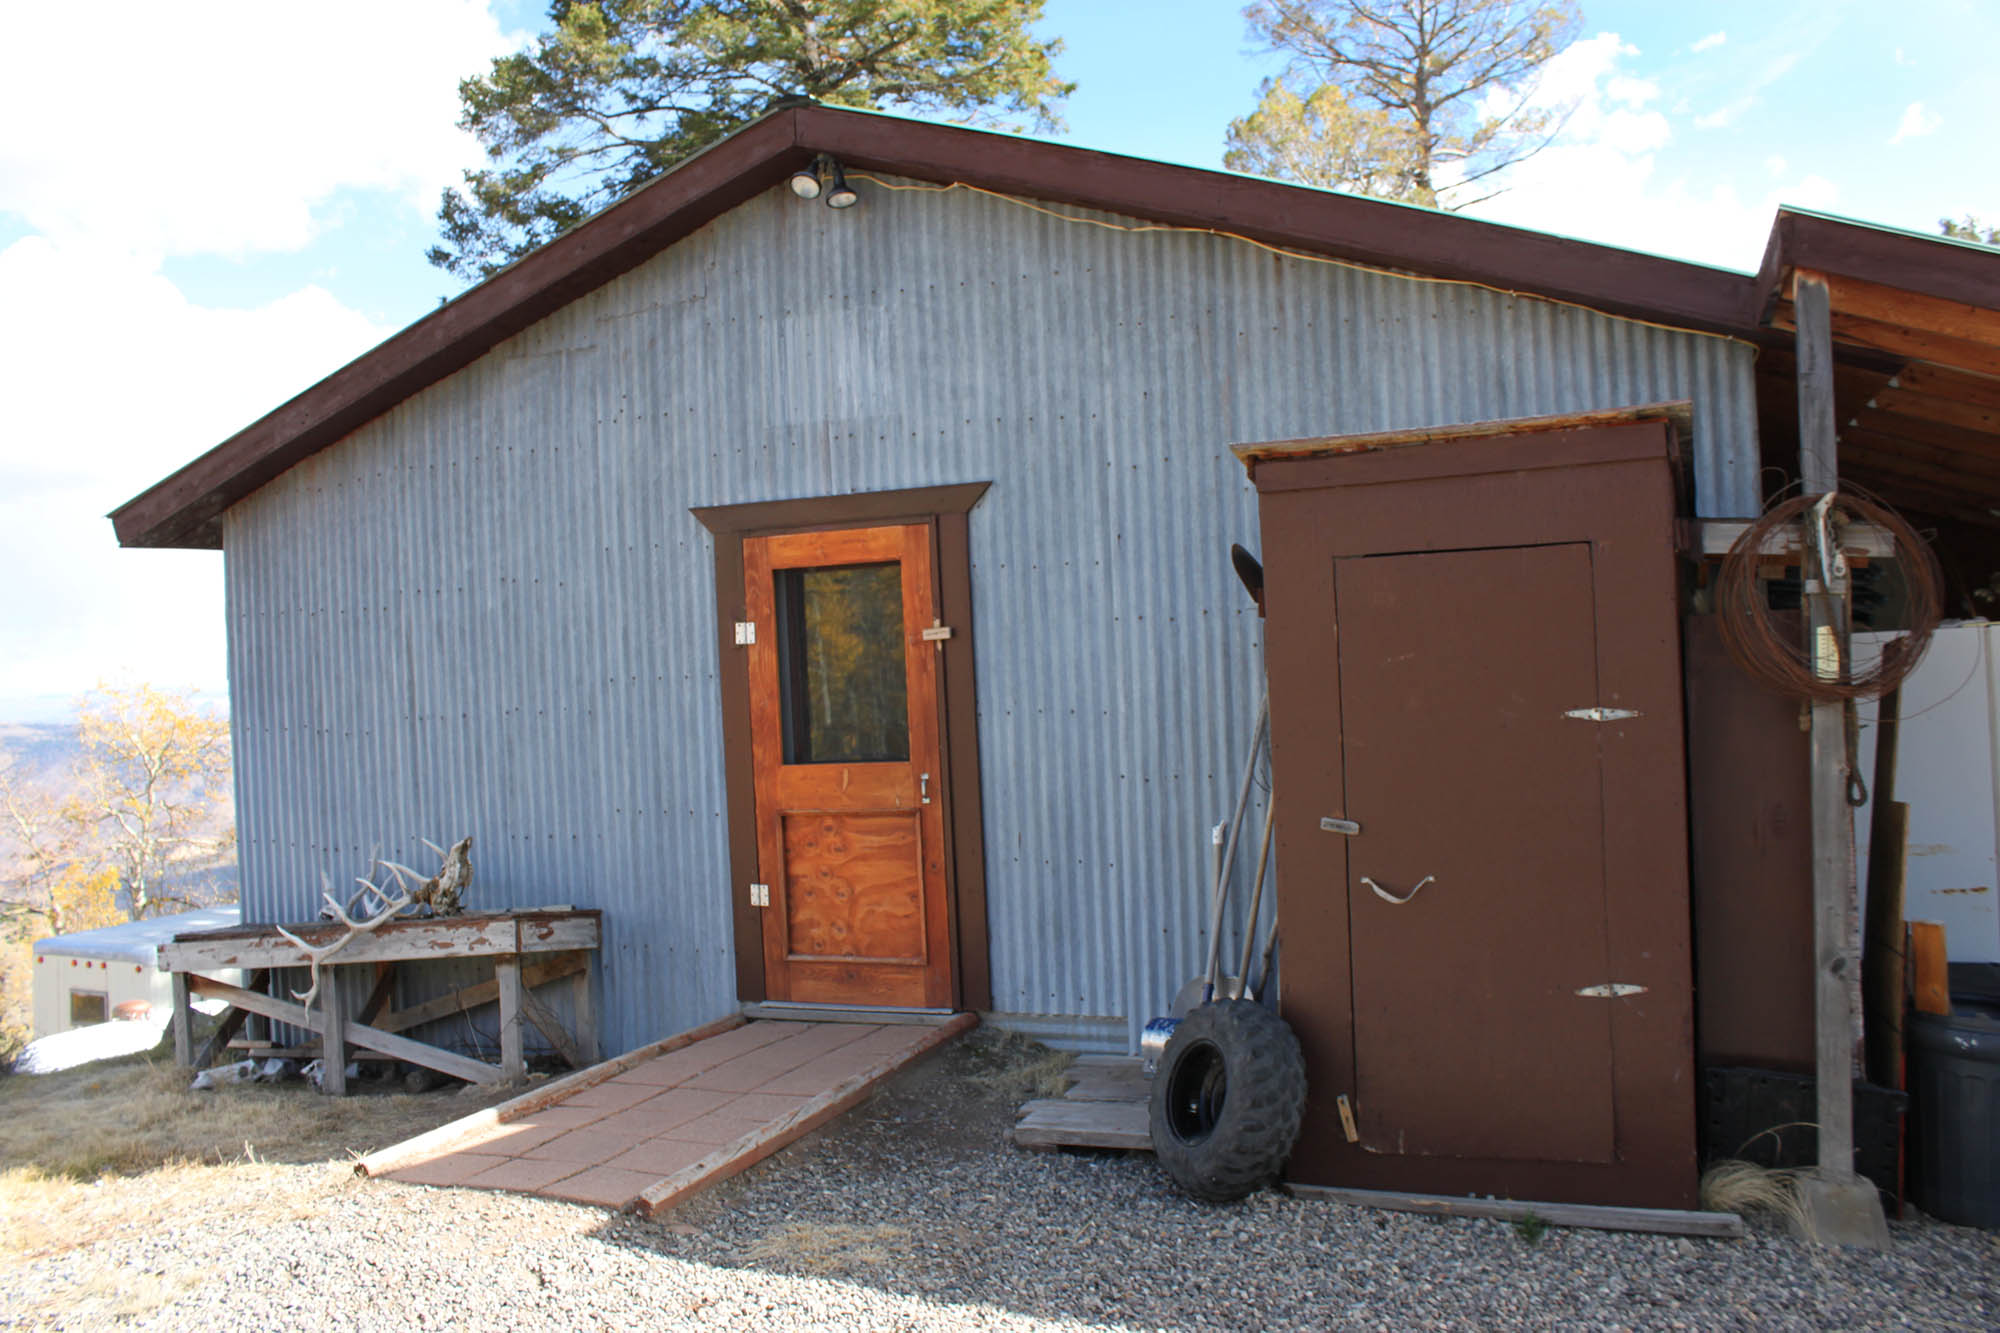 Entrance to cabin